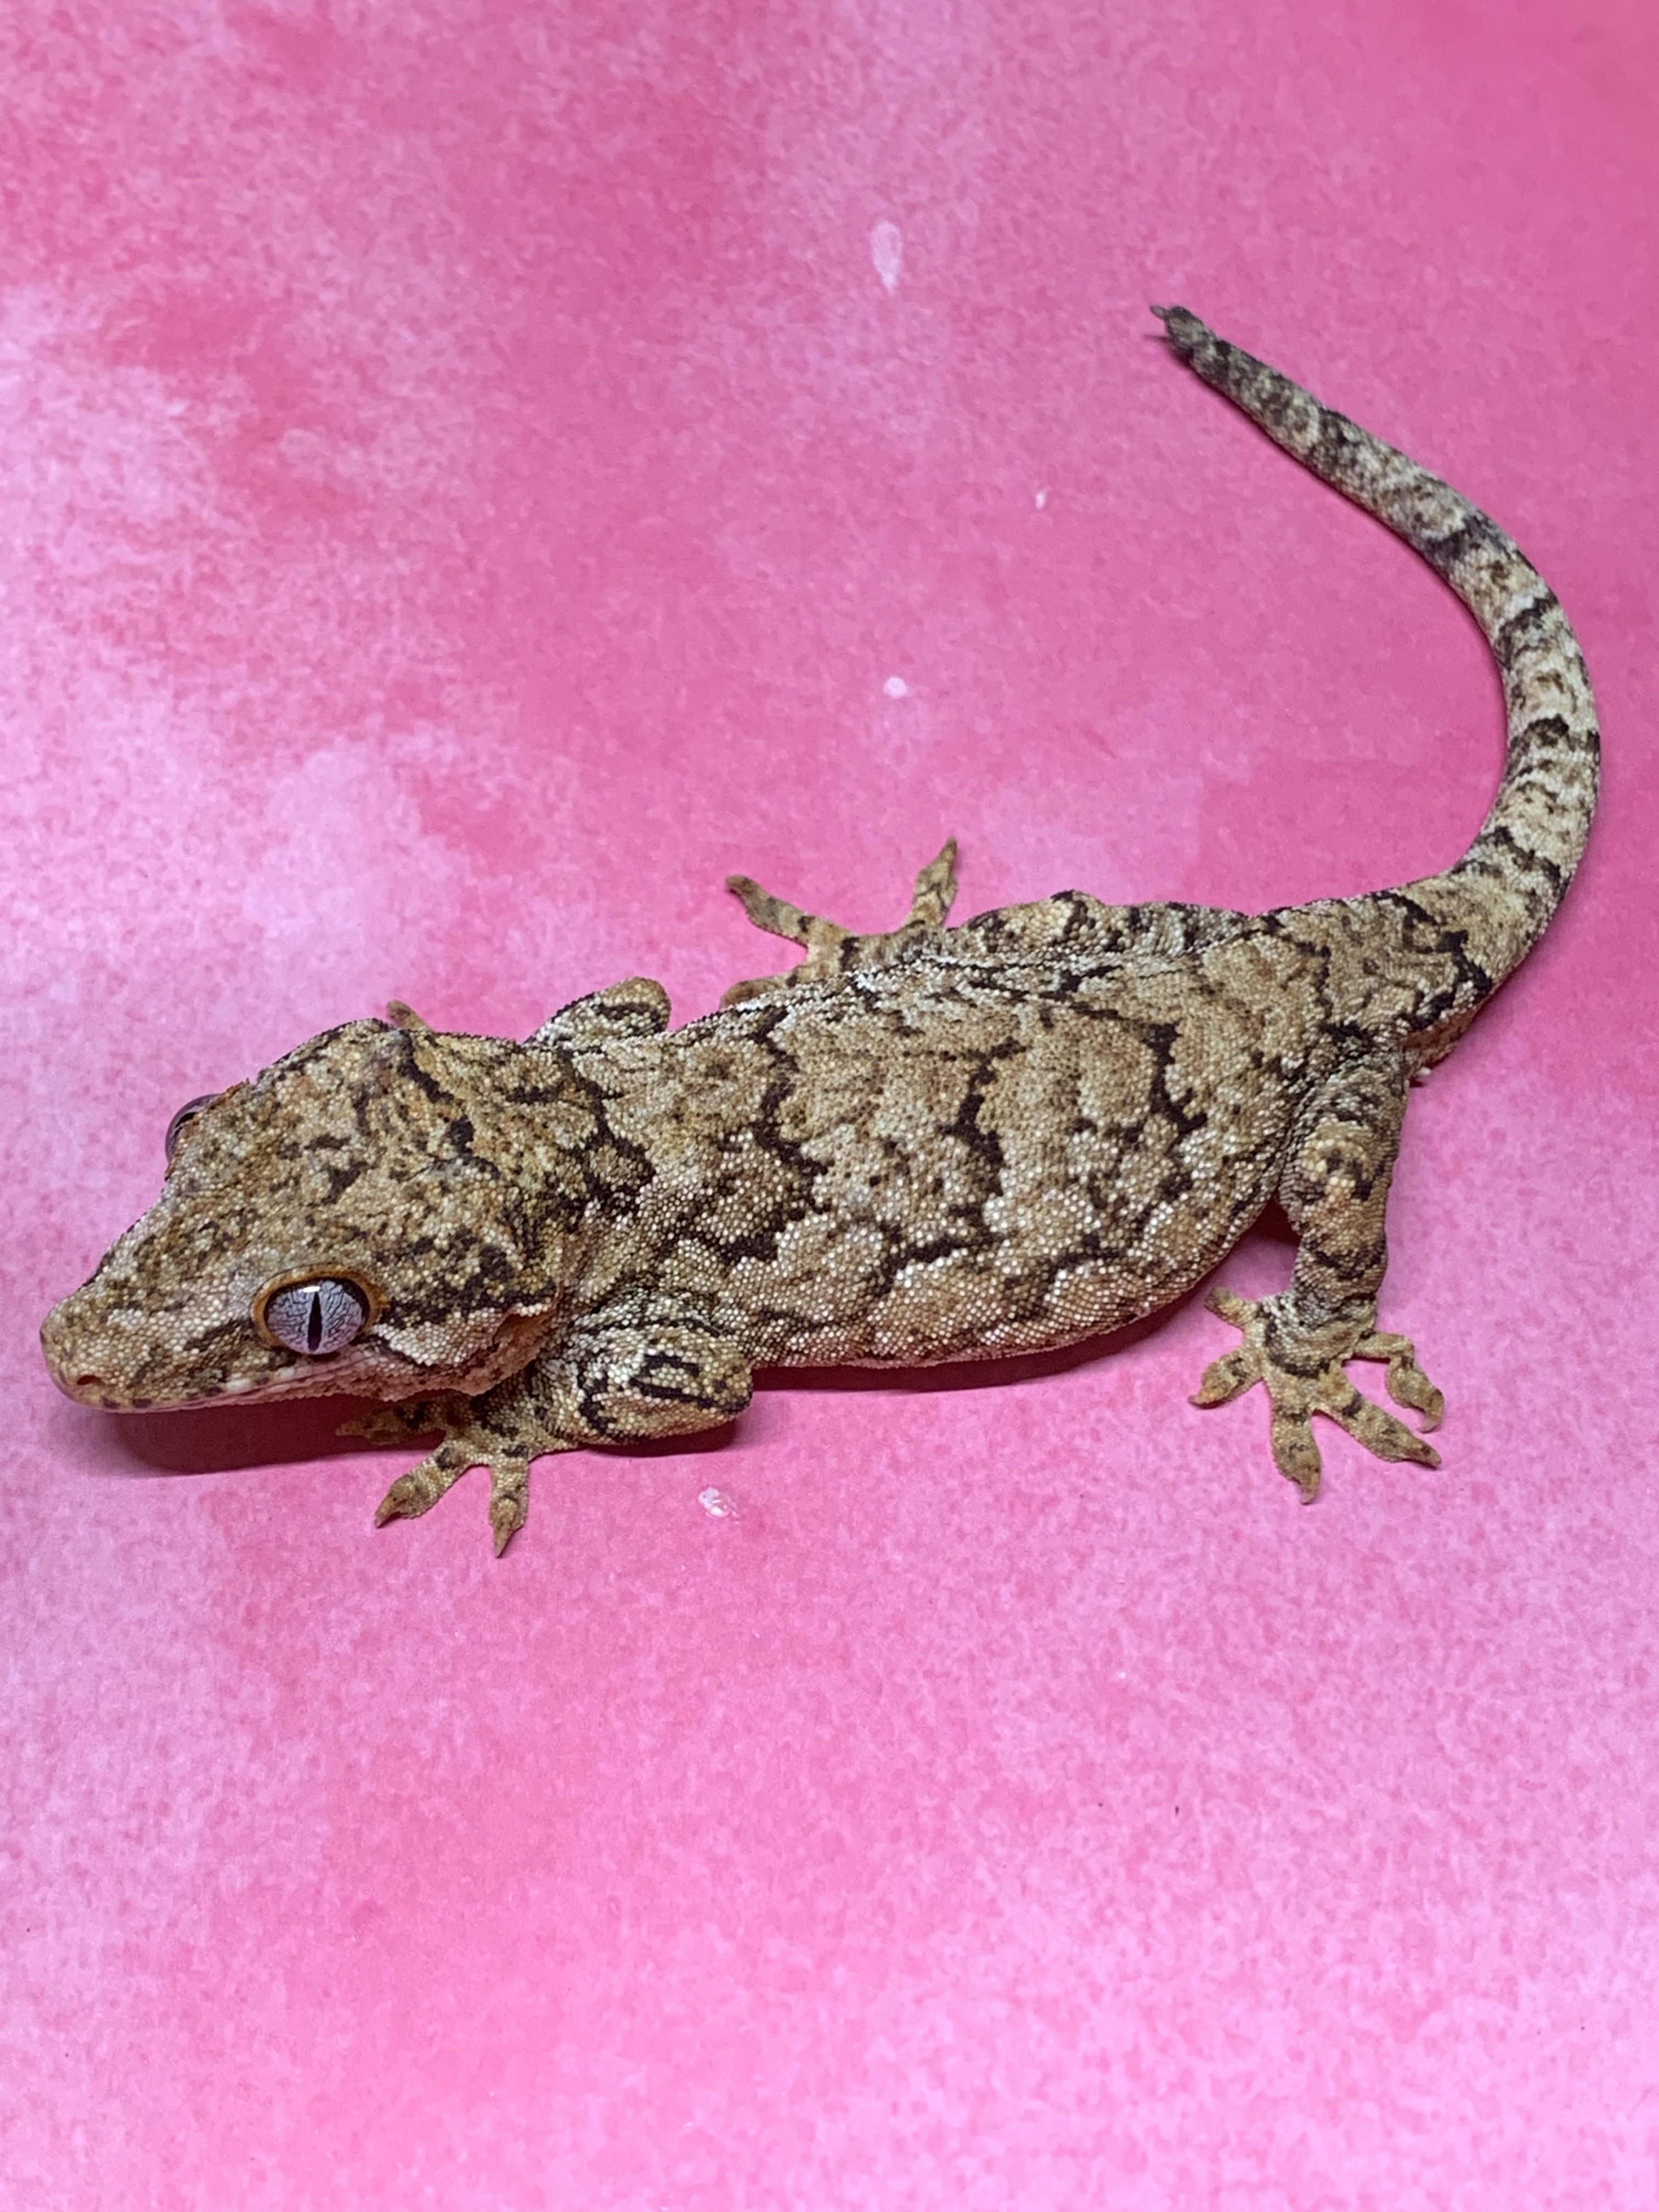 Reticulated Proven Male Gargoyle Gecko by Bergies geckoyles